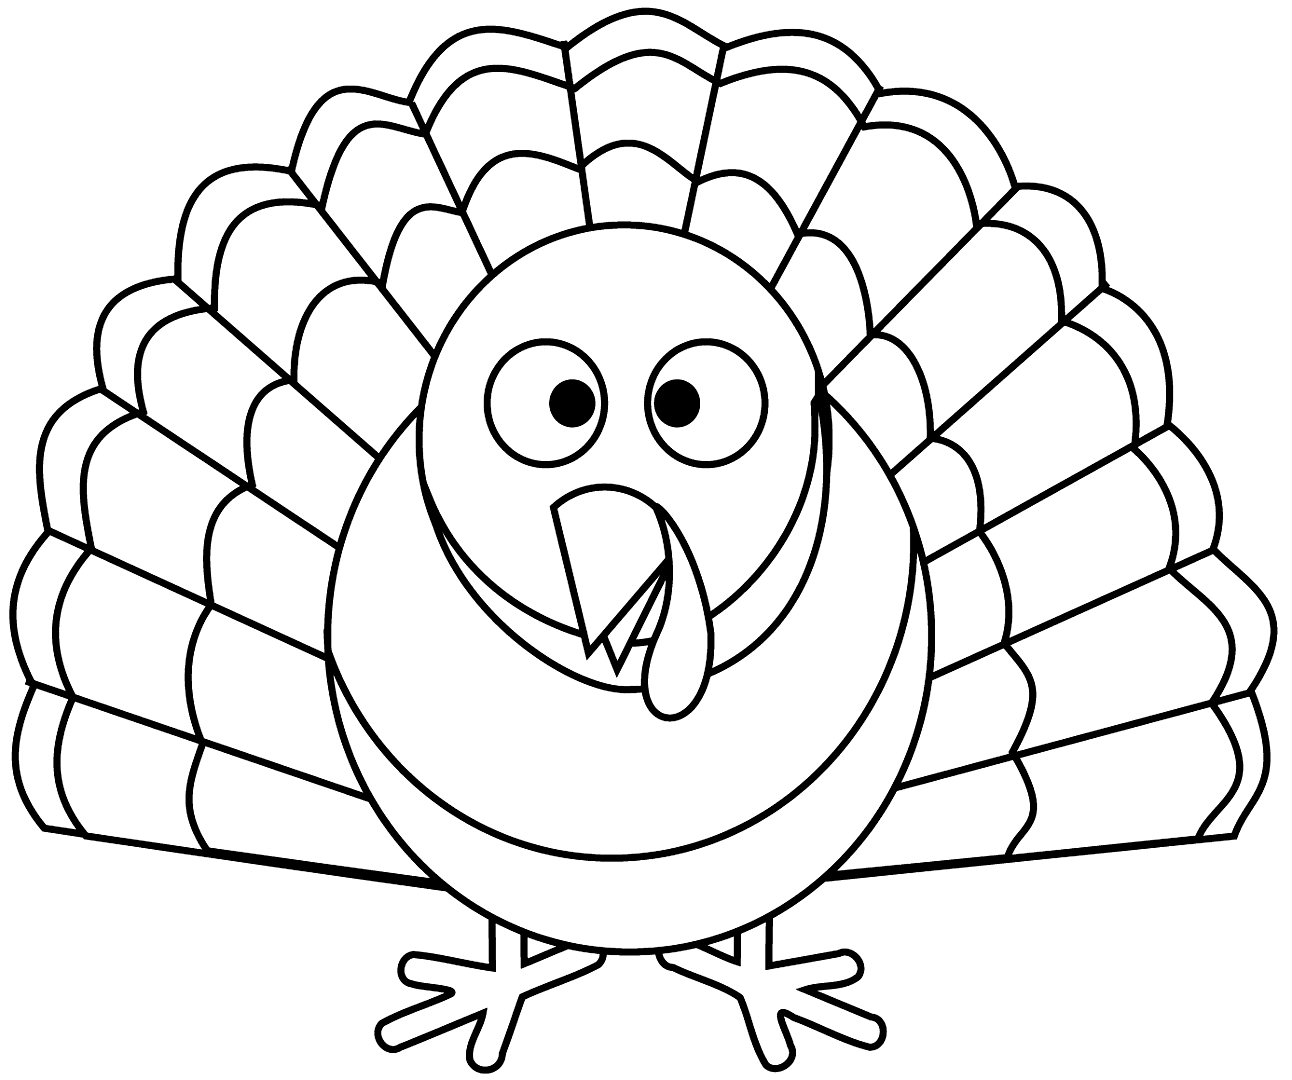 Fun Turkey Coloring Pages